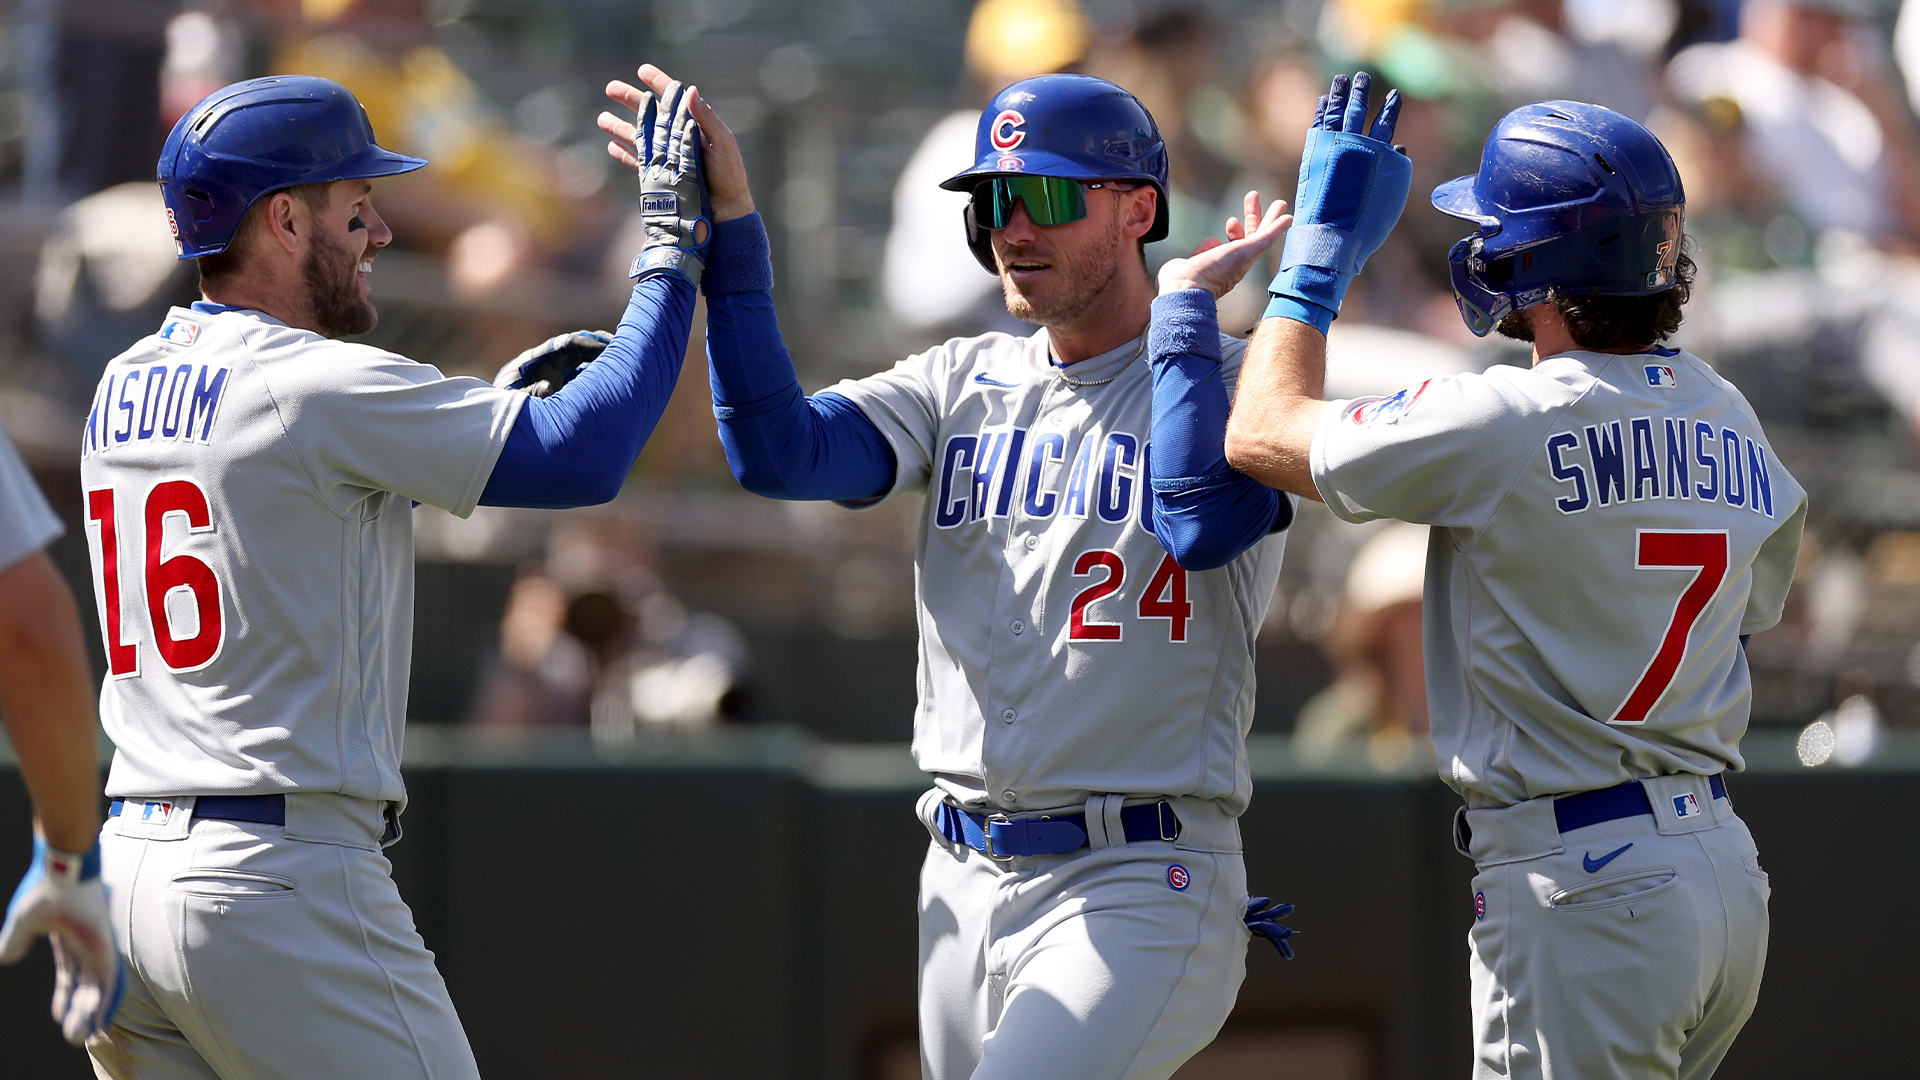 Cubs sweep the A's, Patrick Wisdom stays hot at the plate – NBC